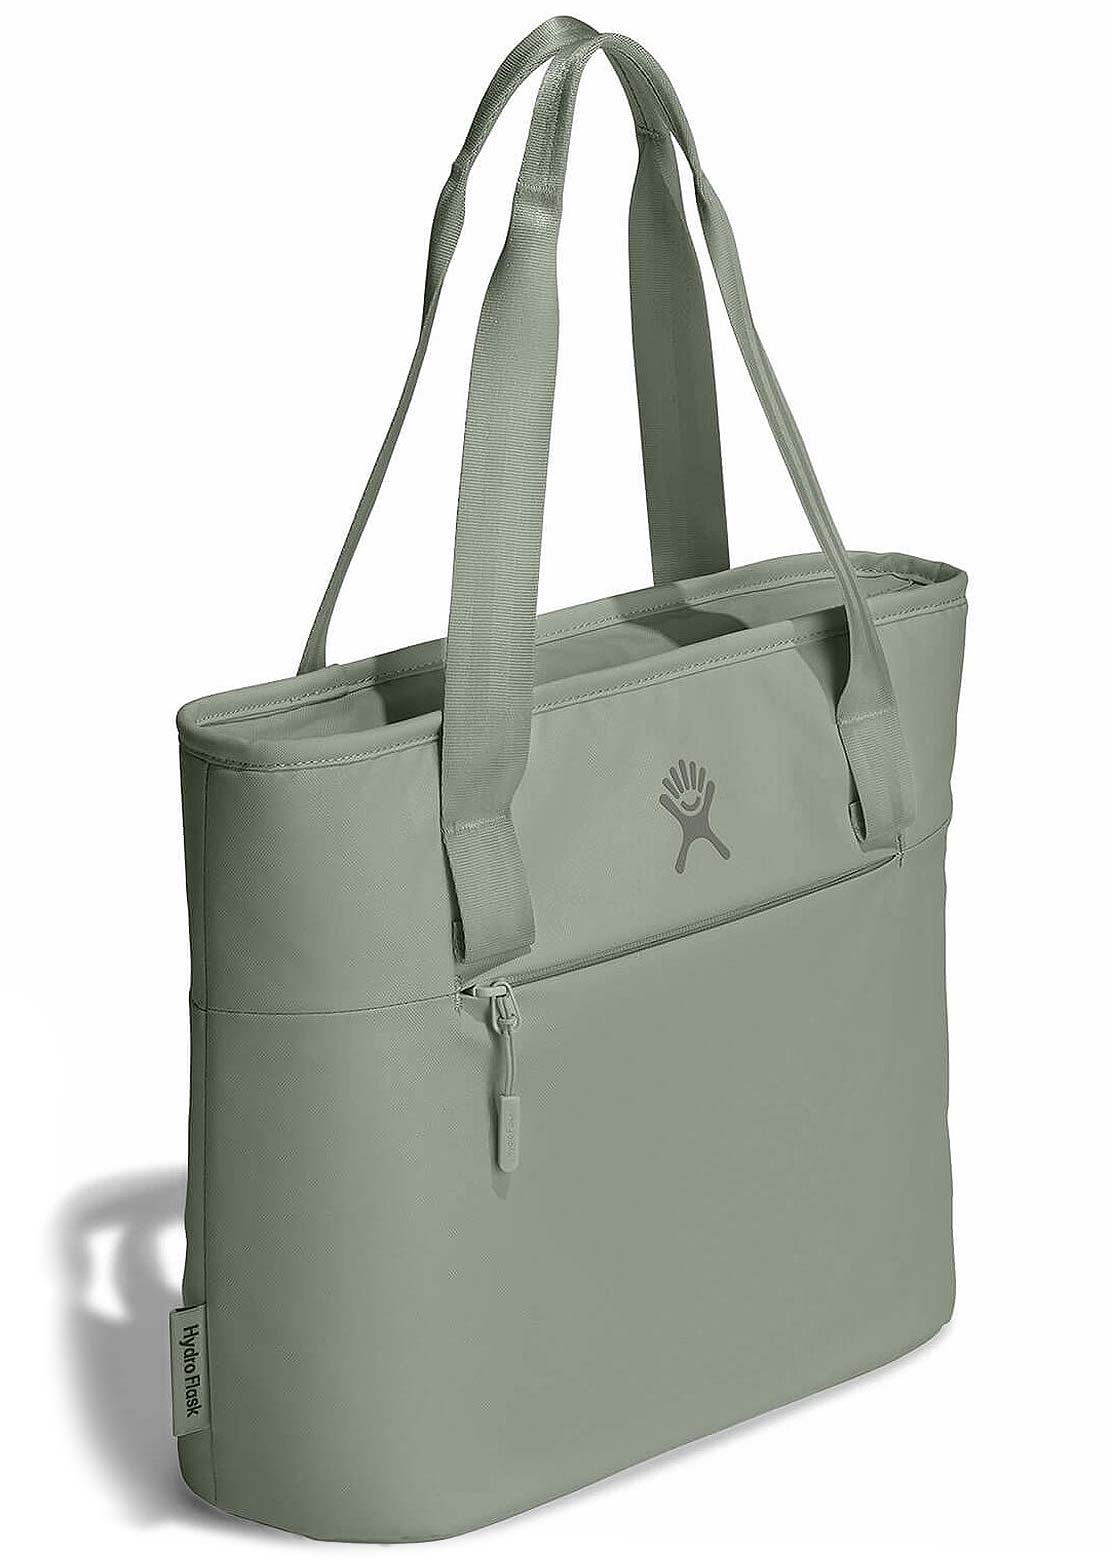 Hydro Flask 8L Insulated Tote Bag Agave